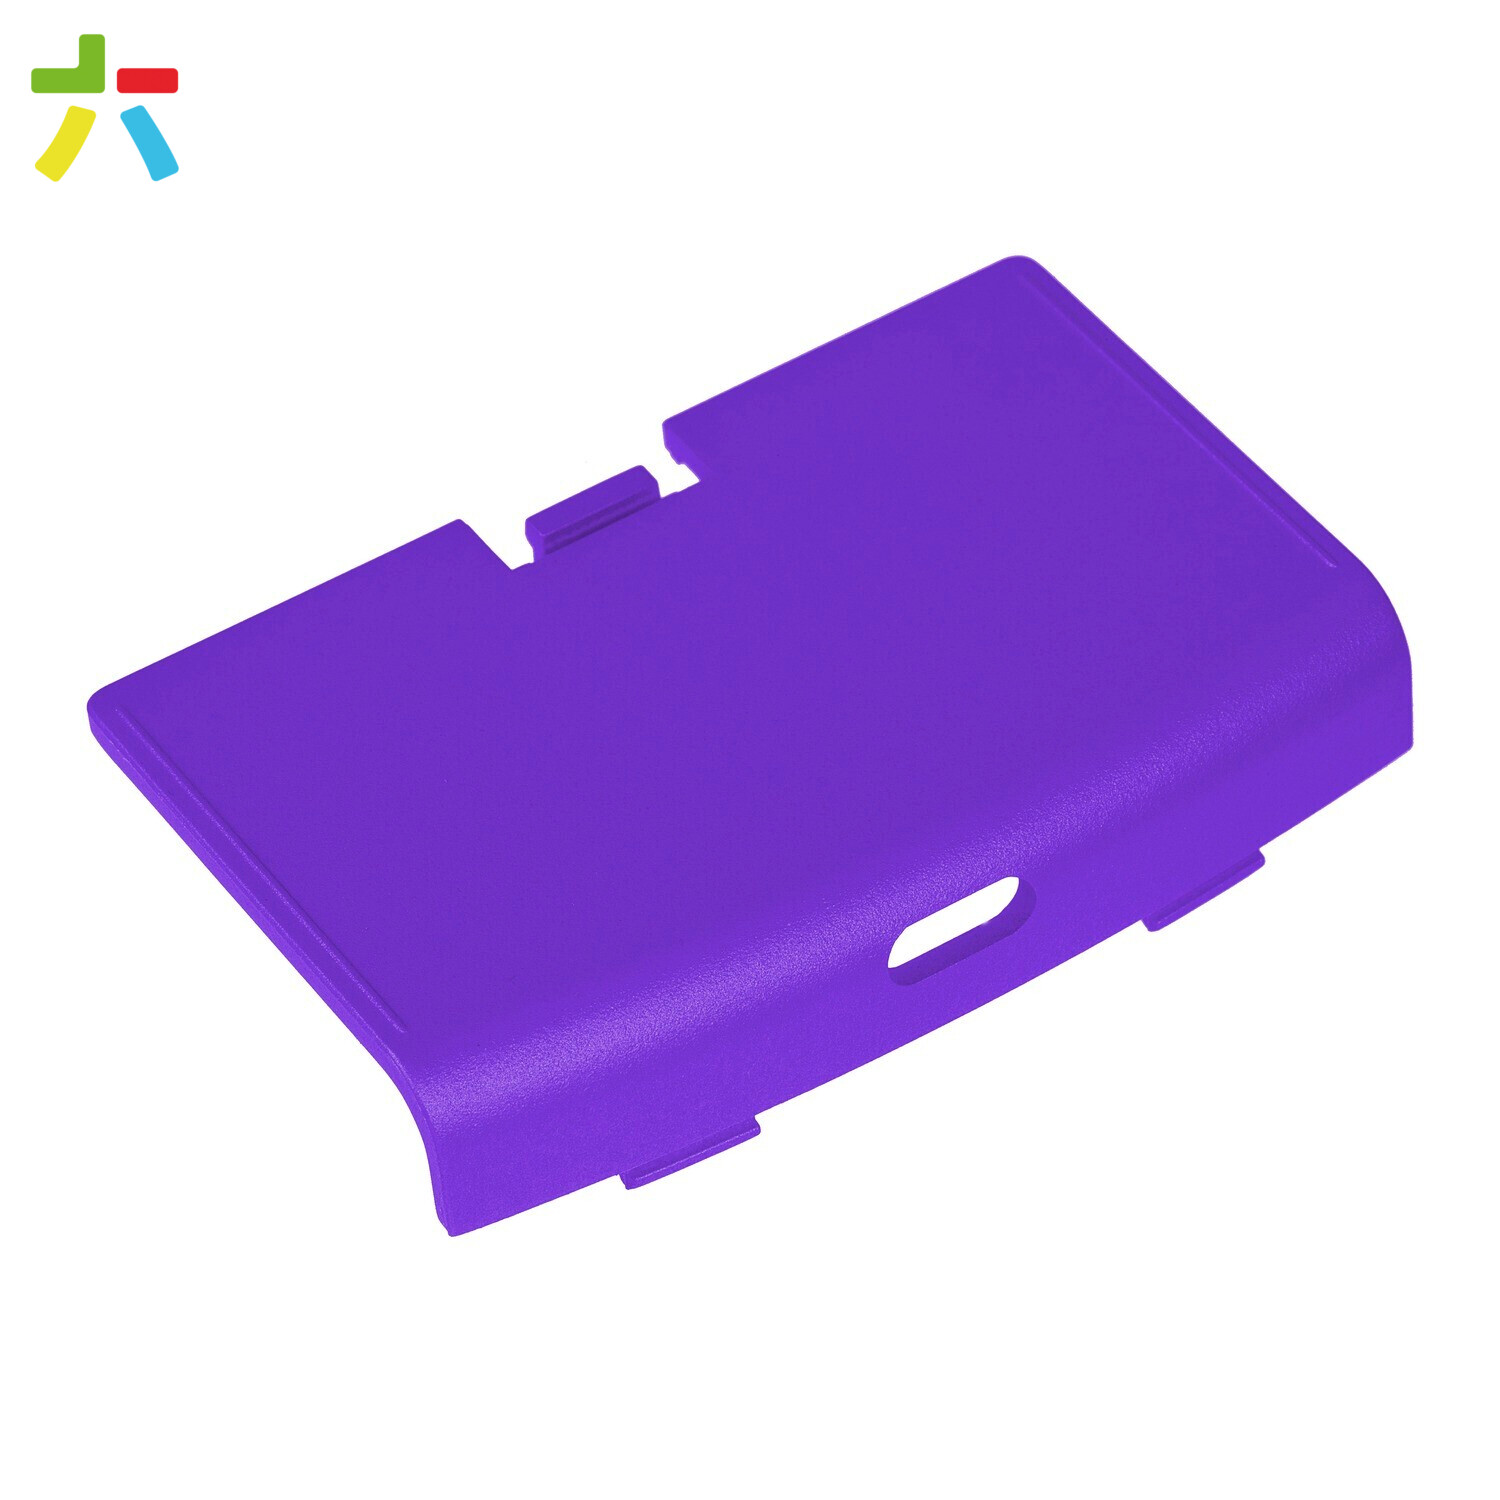 Game Boy Advance USB-C Battery Cover (Pearl Purple - Soft Touch)